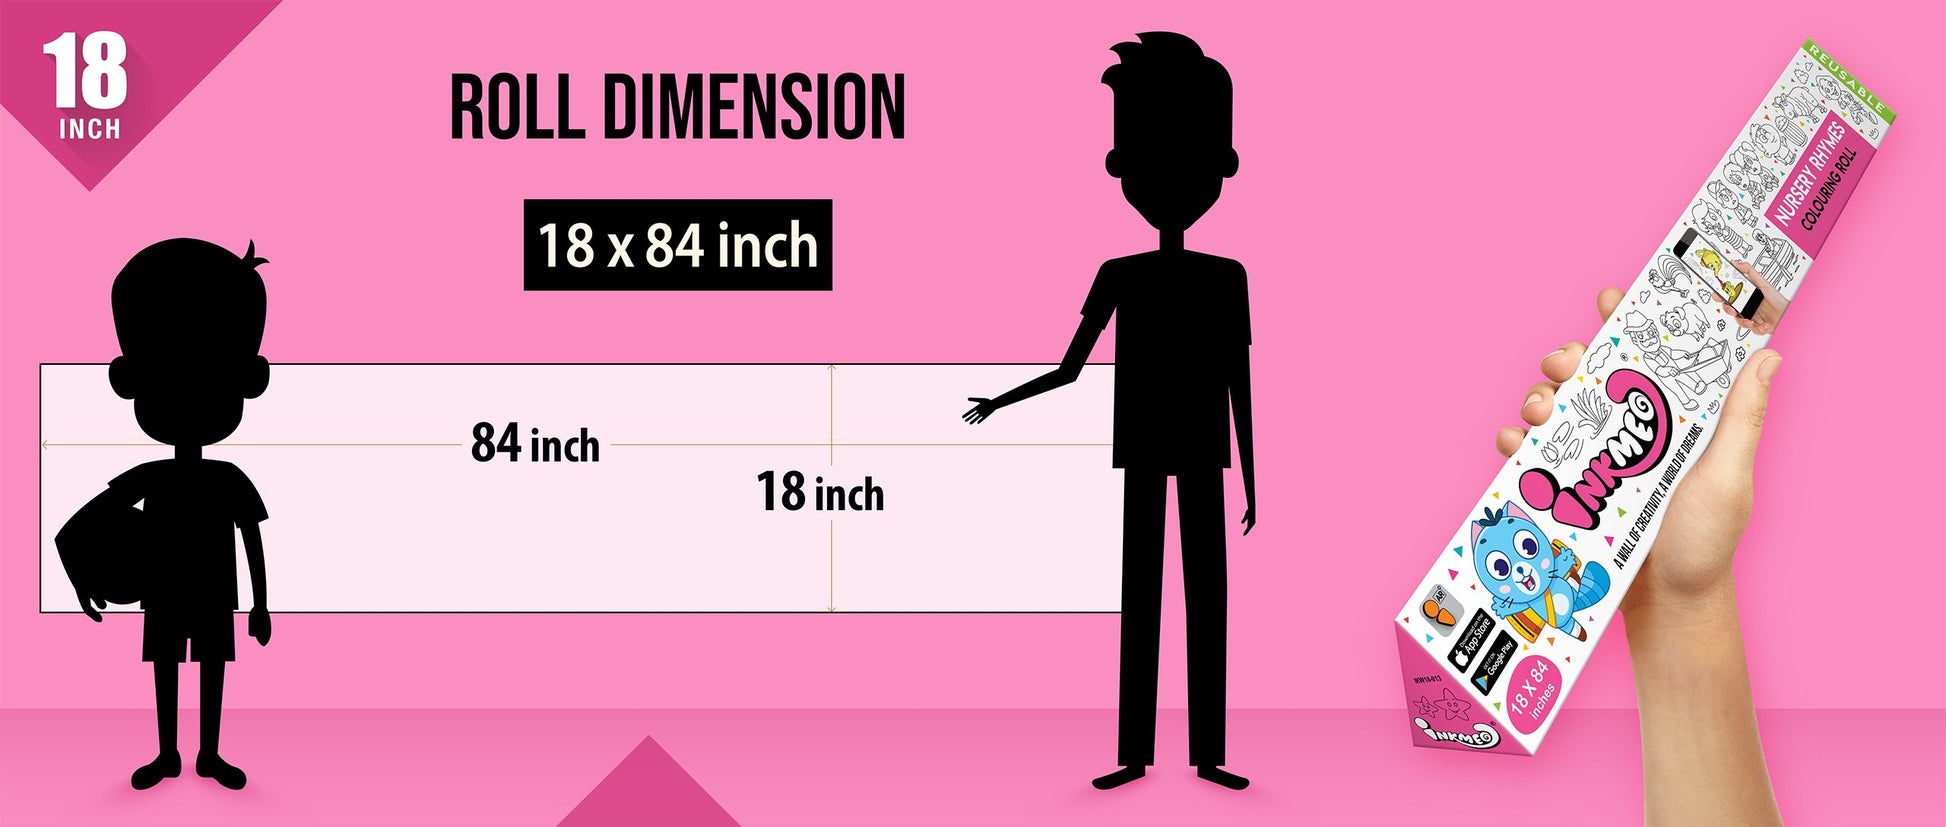 The image shows a pink background with a ruler indicating child and adult height on an 18*84 inch paper roll dimension.